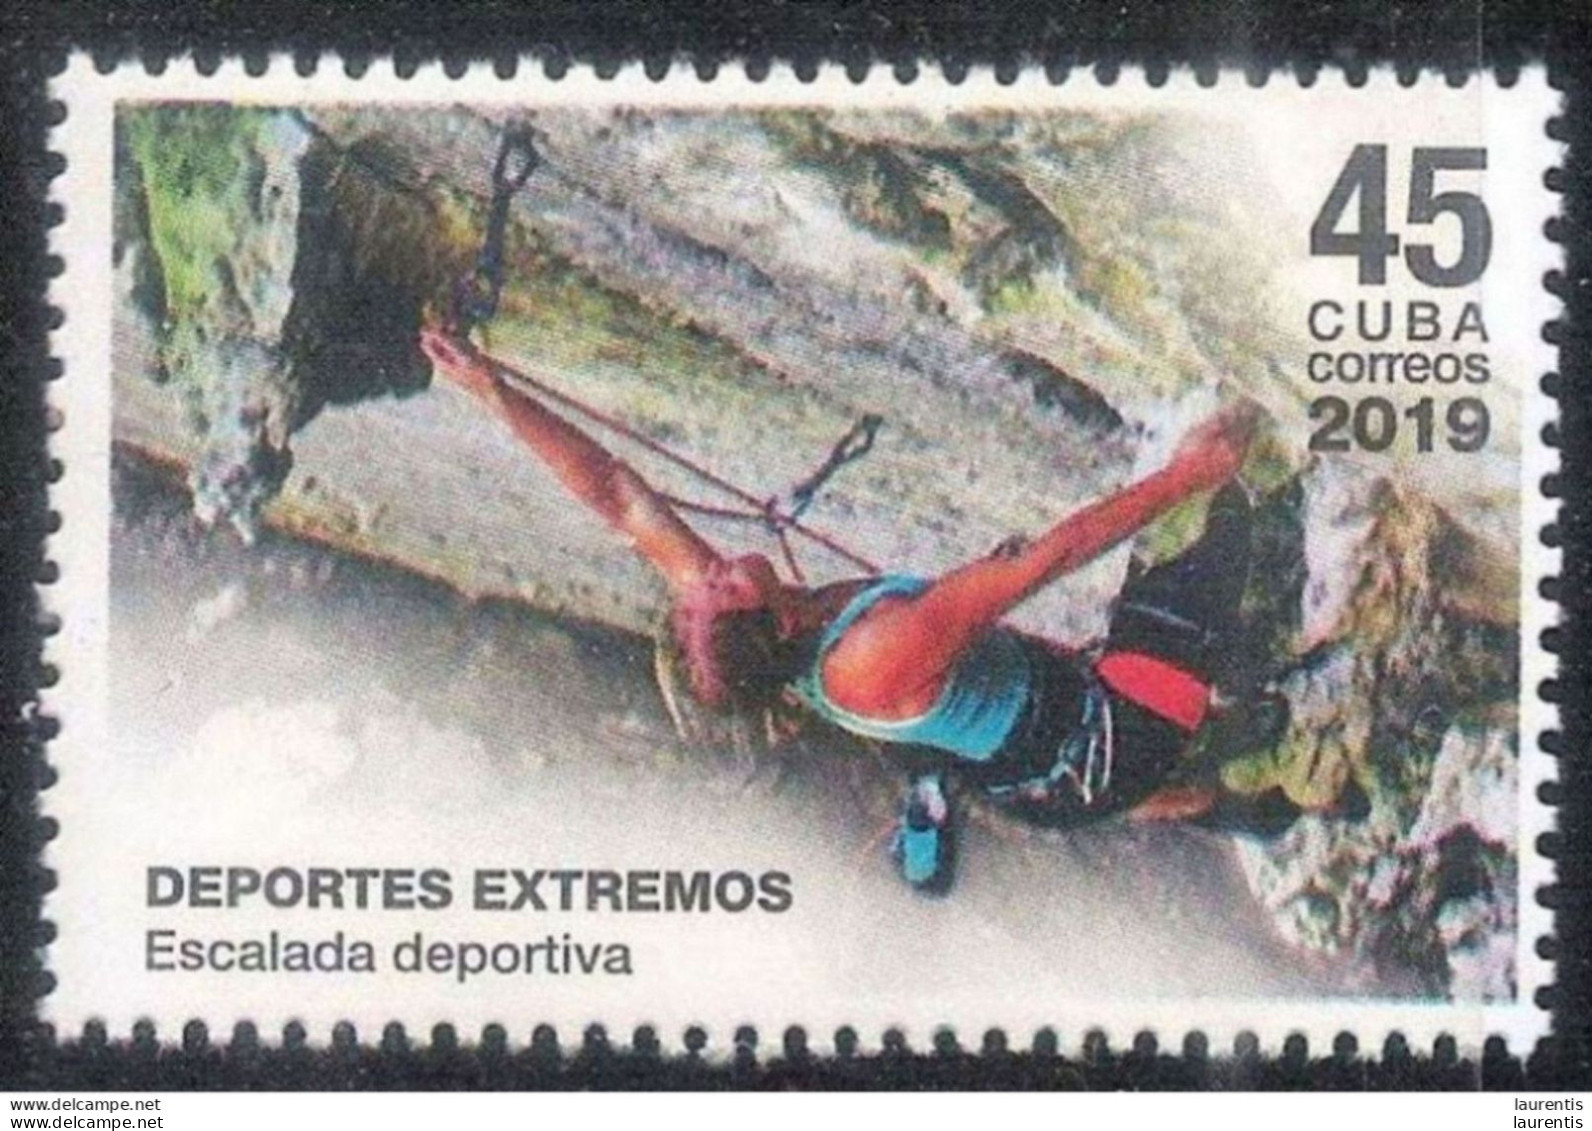 1253  Climbing - Only This One In The Stamp Set - MNH - Cb - 1,25 - Escalade